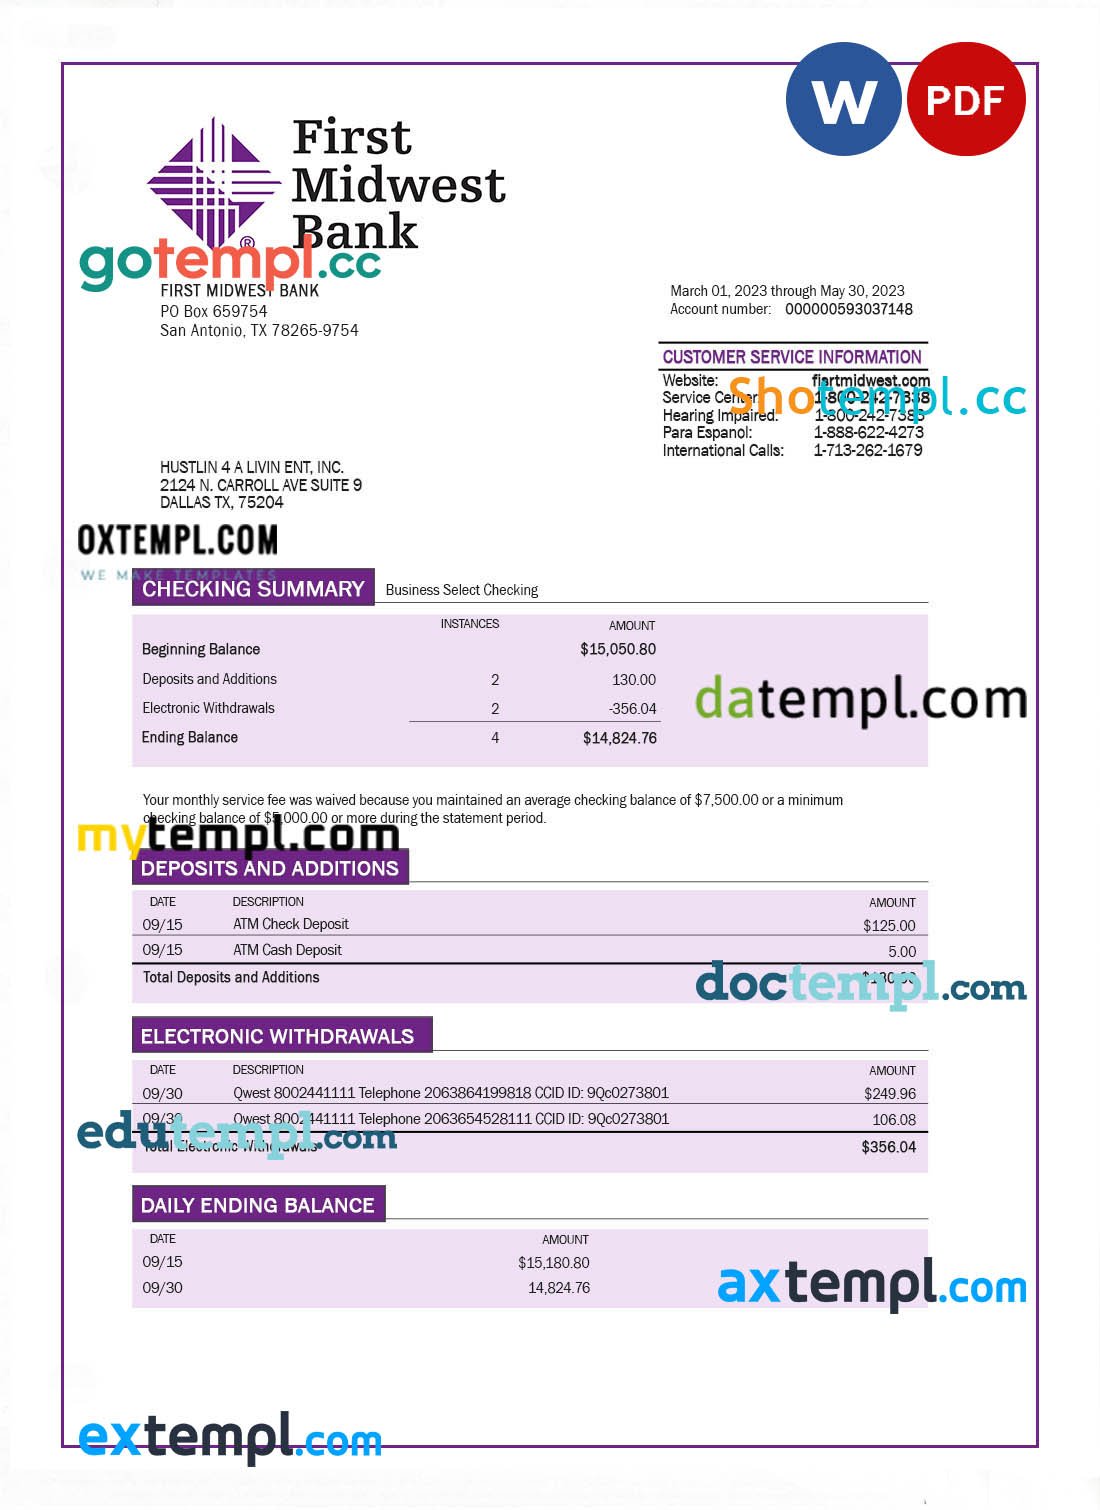 Timor-Leste BNCTL bank statement template in Word and PDF format